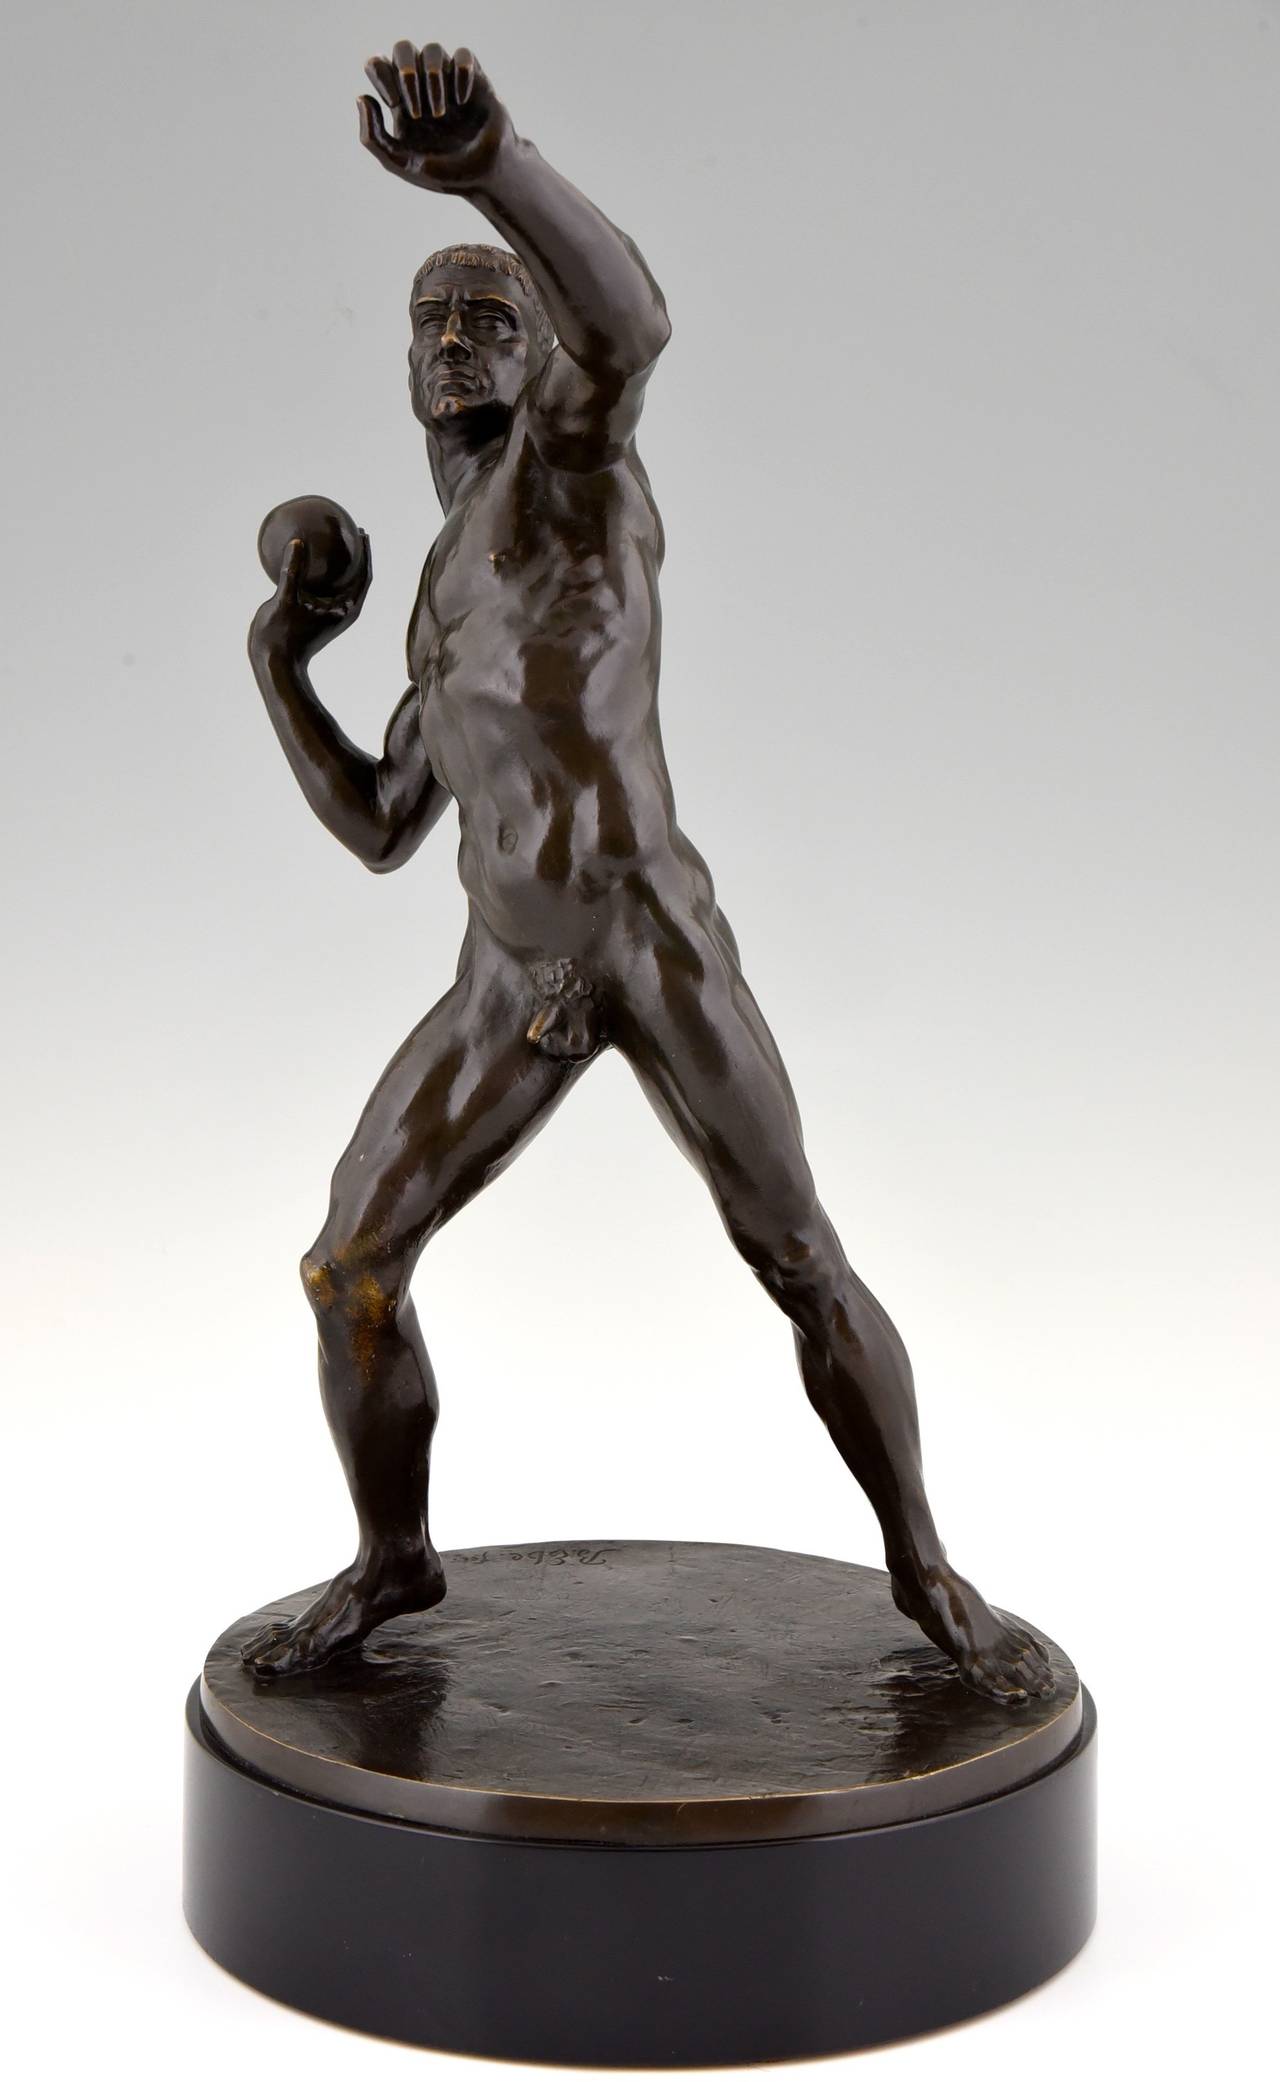 Description:  Antique sculpture of a male nude athlete playing shot put. 
Artist: Burkhart Ebe. (1881 Berlin -1949)
Signature and Marks:  B. Ebe fec. 
Date:  1930.

Material: Bronze on wooden base. 
Origin:  Gemany. 
Size: 
H. 22.8 inch x L.